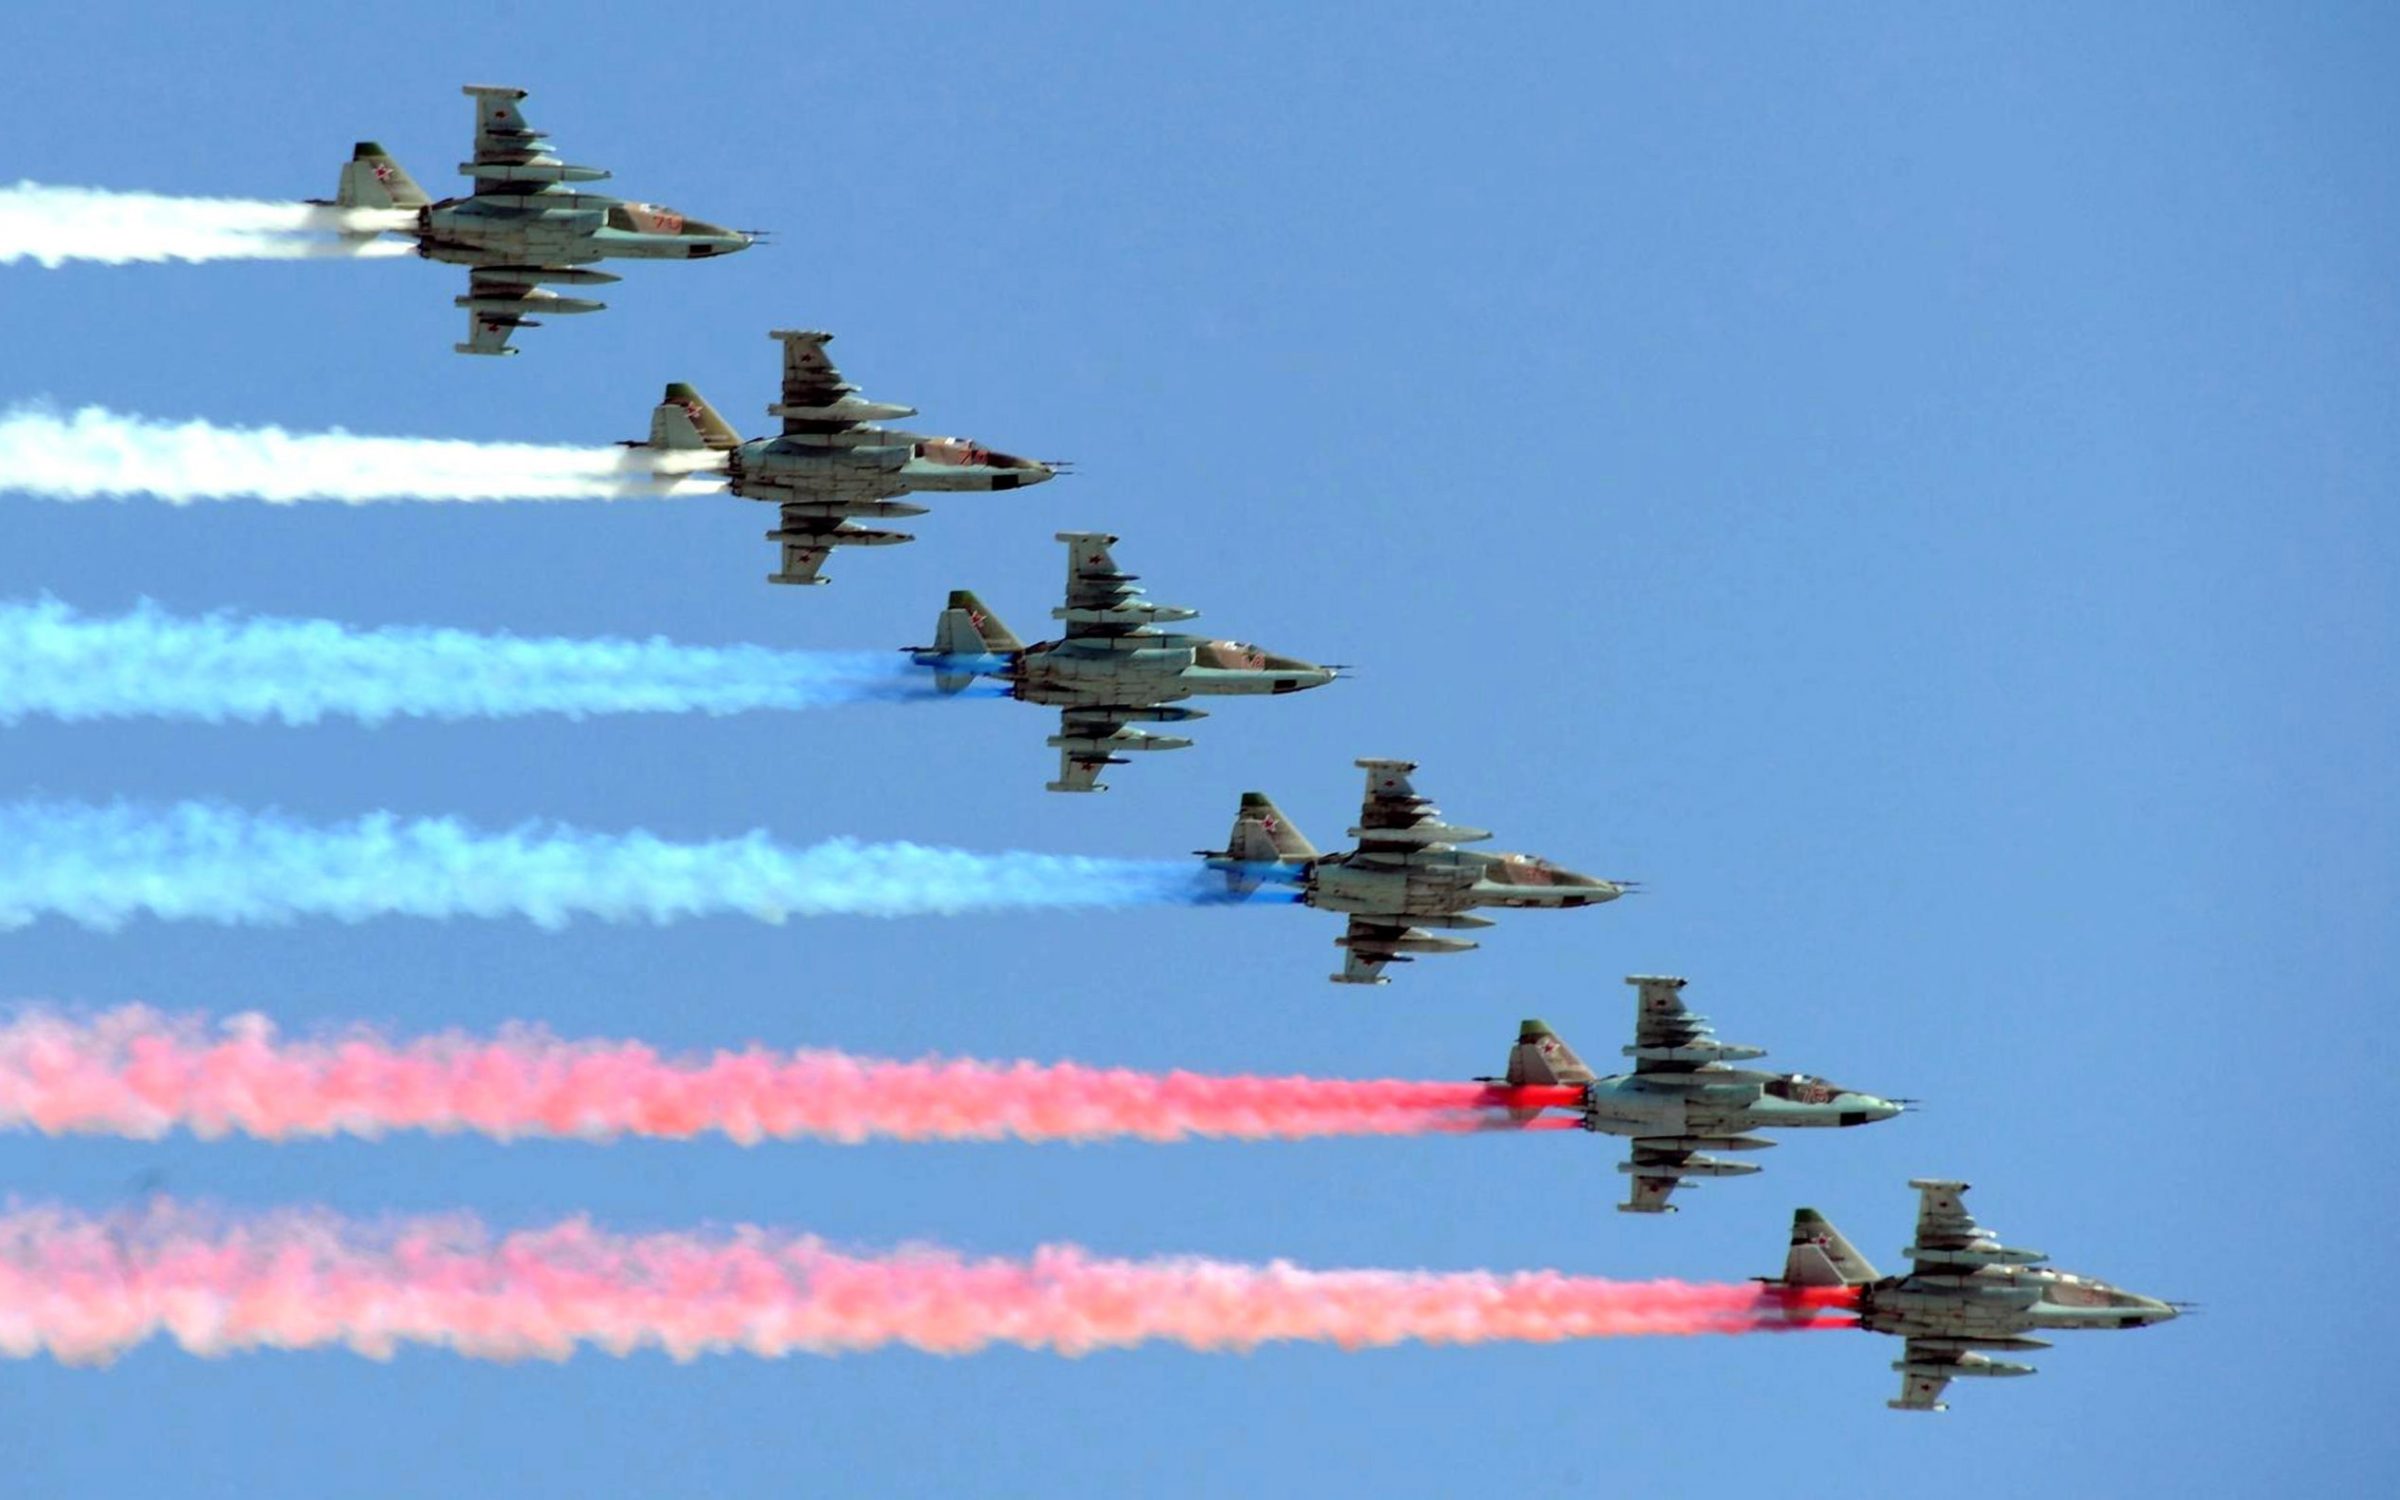 Russian air force fighter jets fly over during the annual Victory Day military parade marking the 71th anniversary of the end of World War II in Red Square May 9, 2016 in Moscow, Russia.